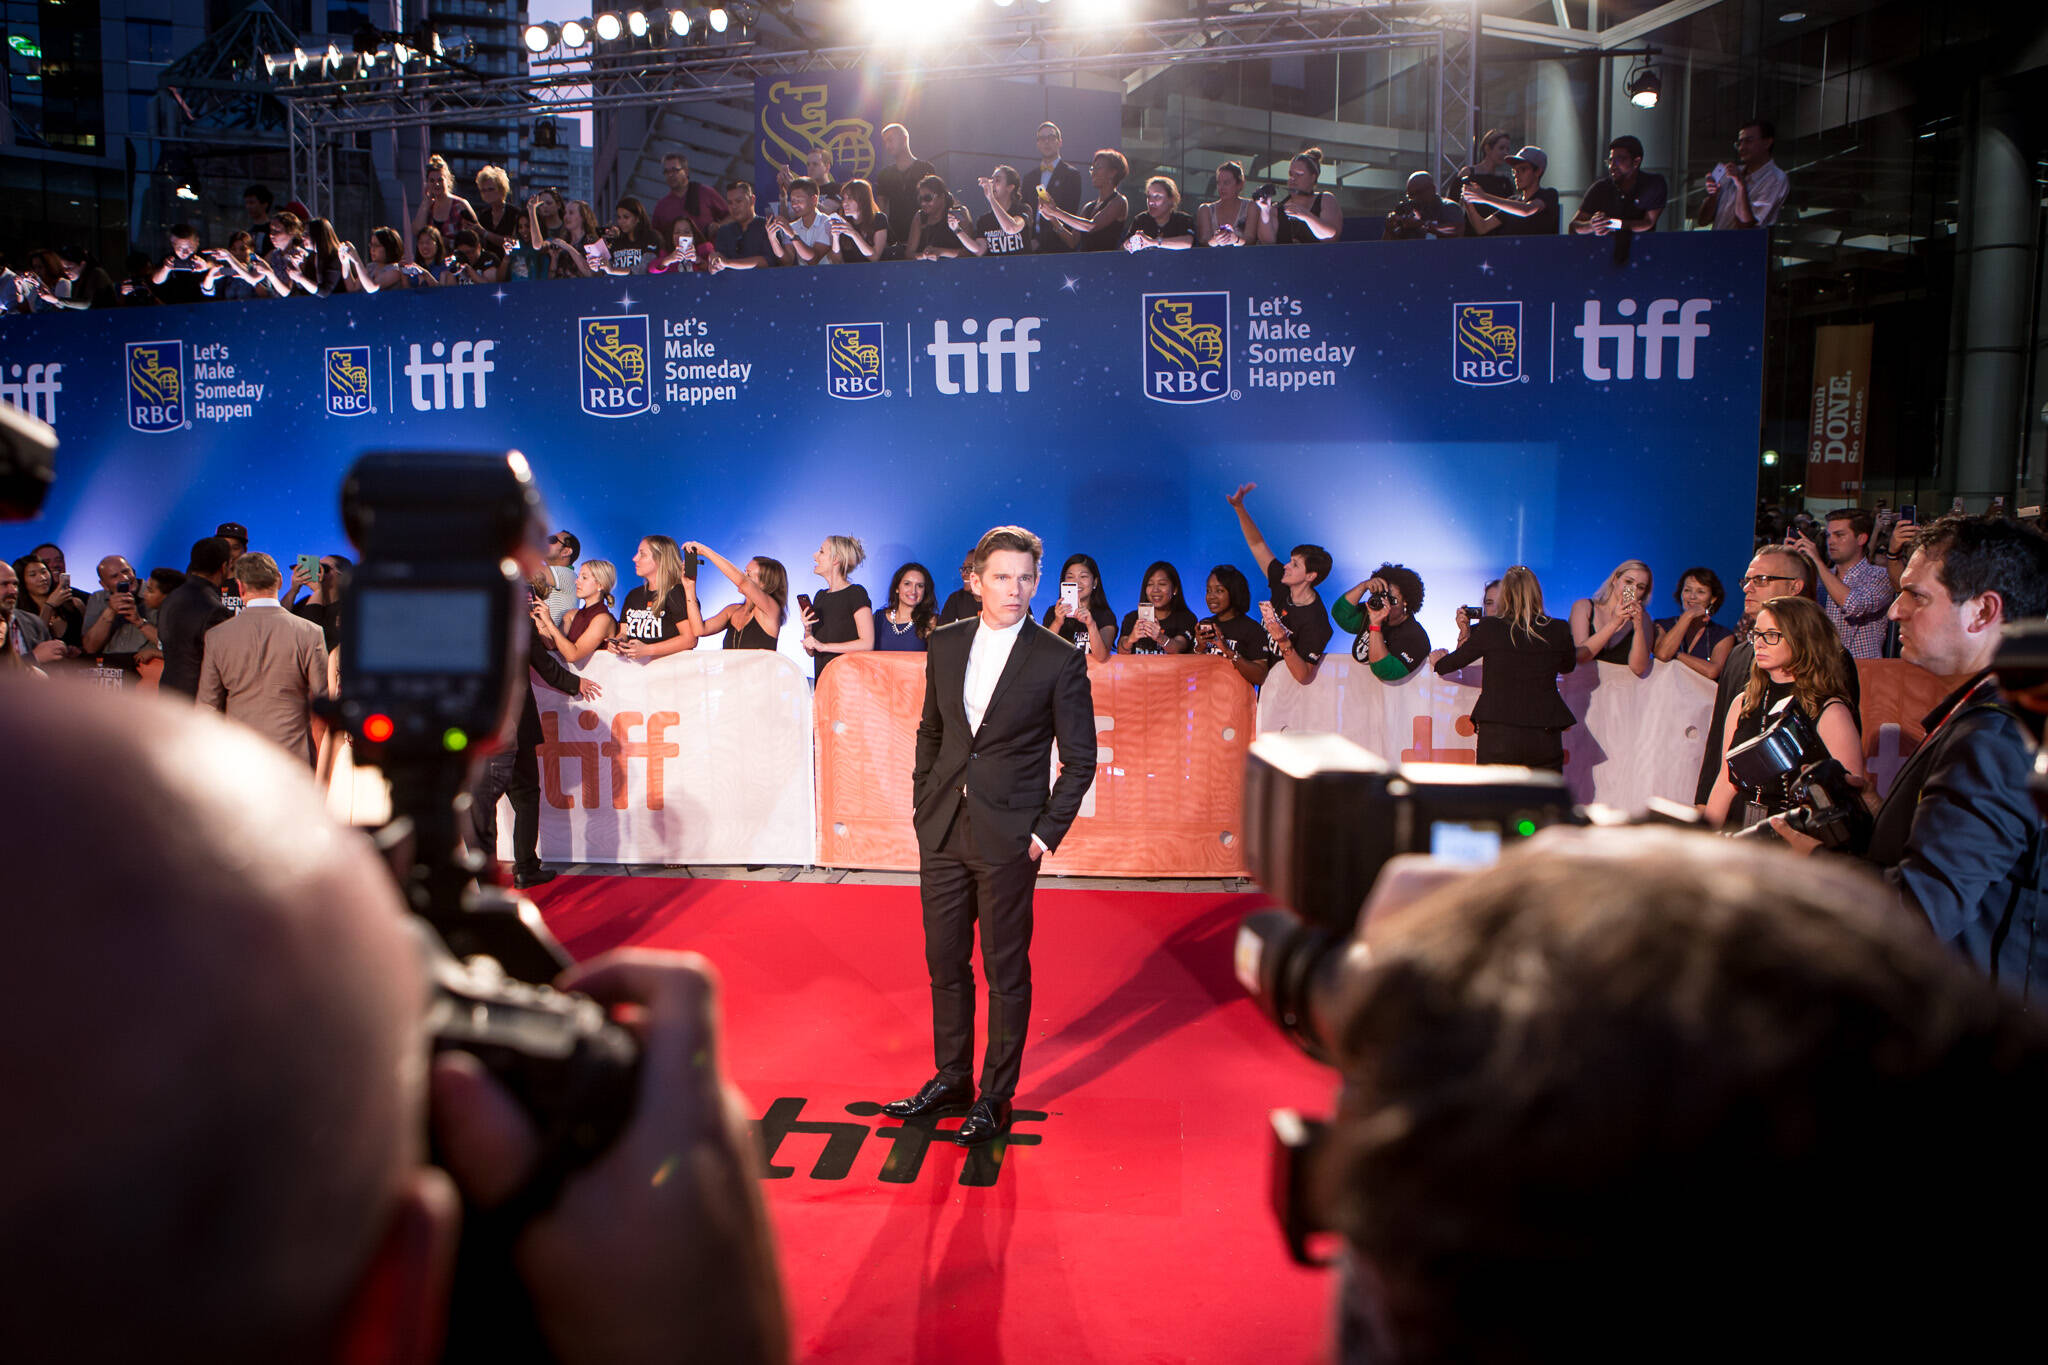 Toronto International Film Festival is going to be smaller this year